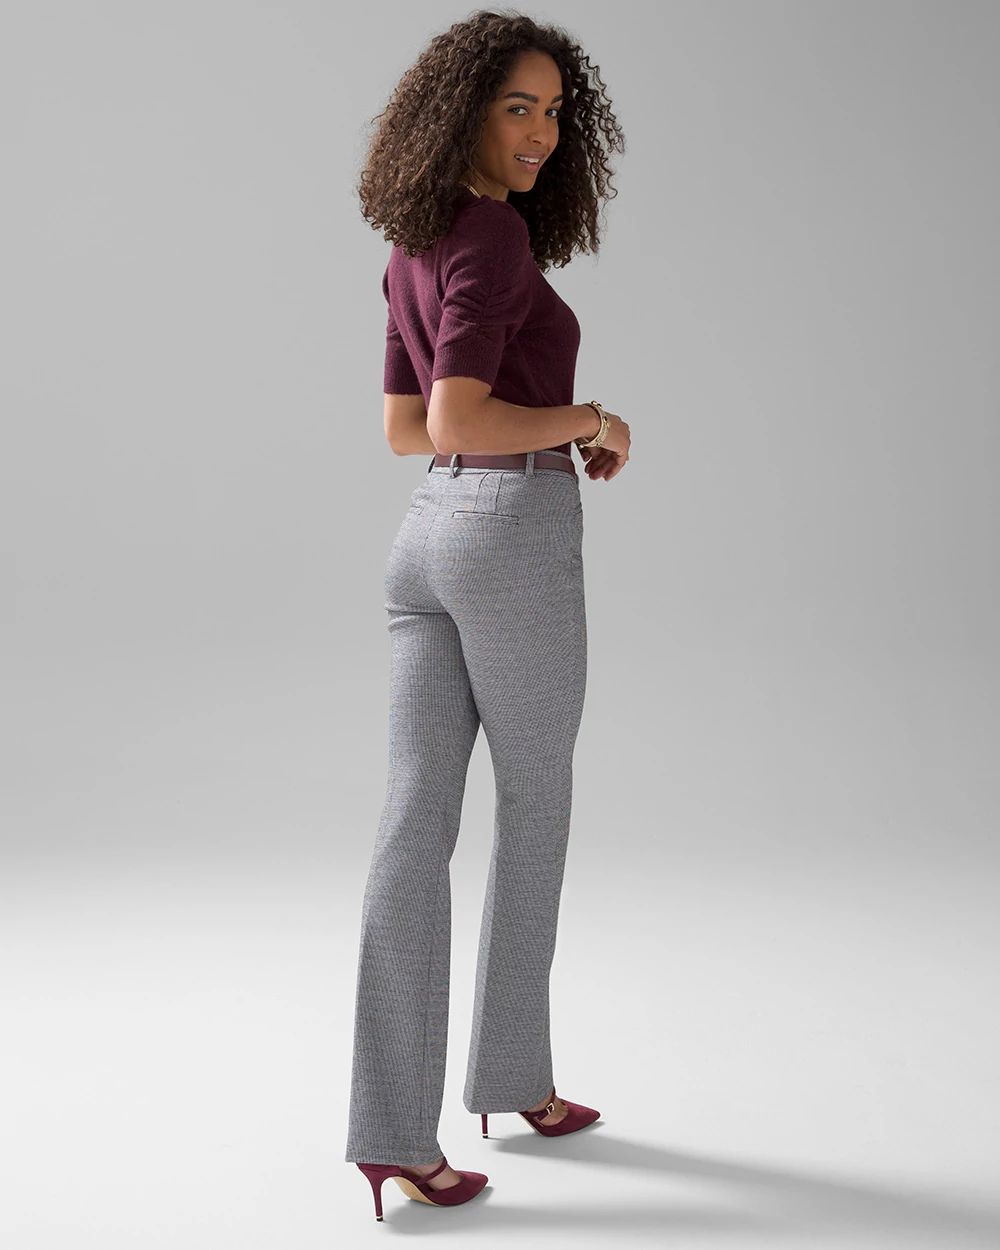 WHBM® Ines Slim Bootleg Pant click to view larger image.